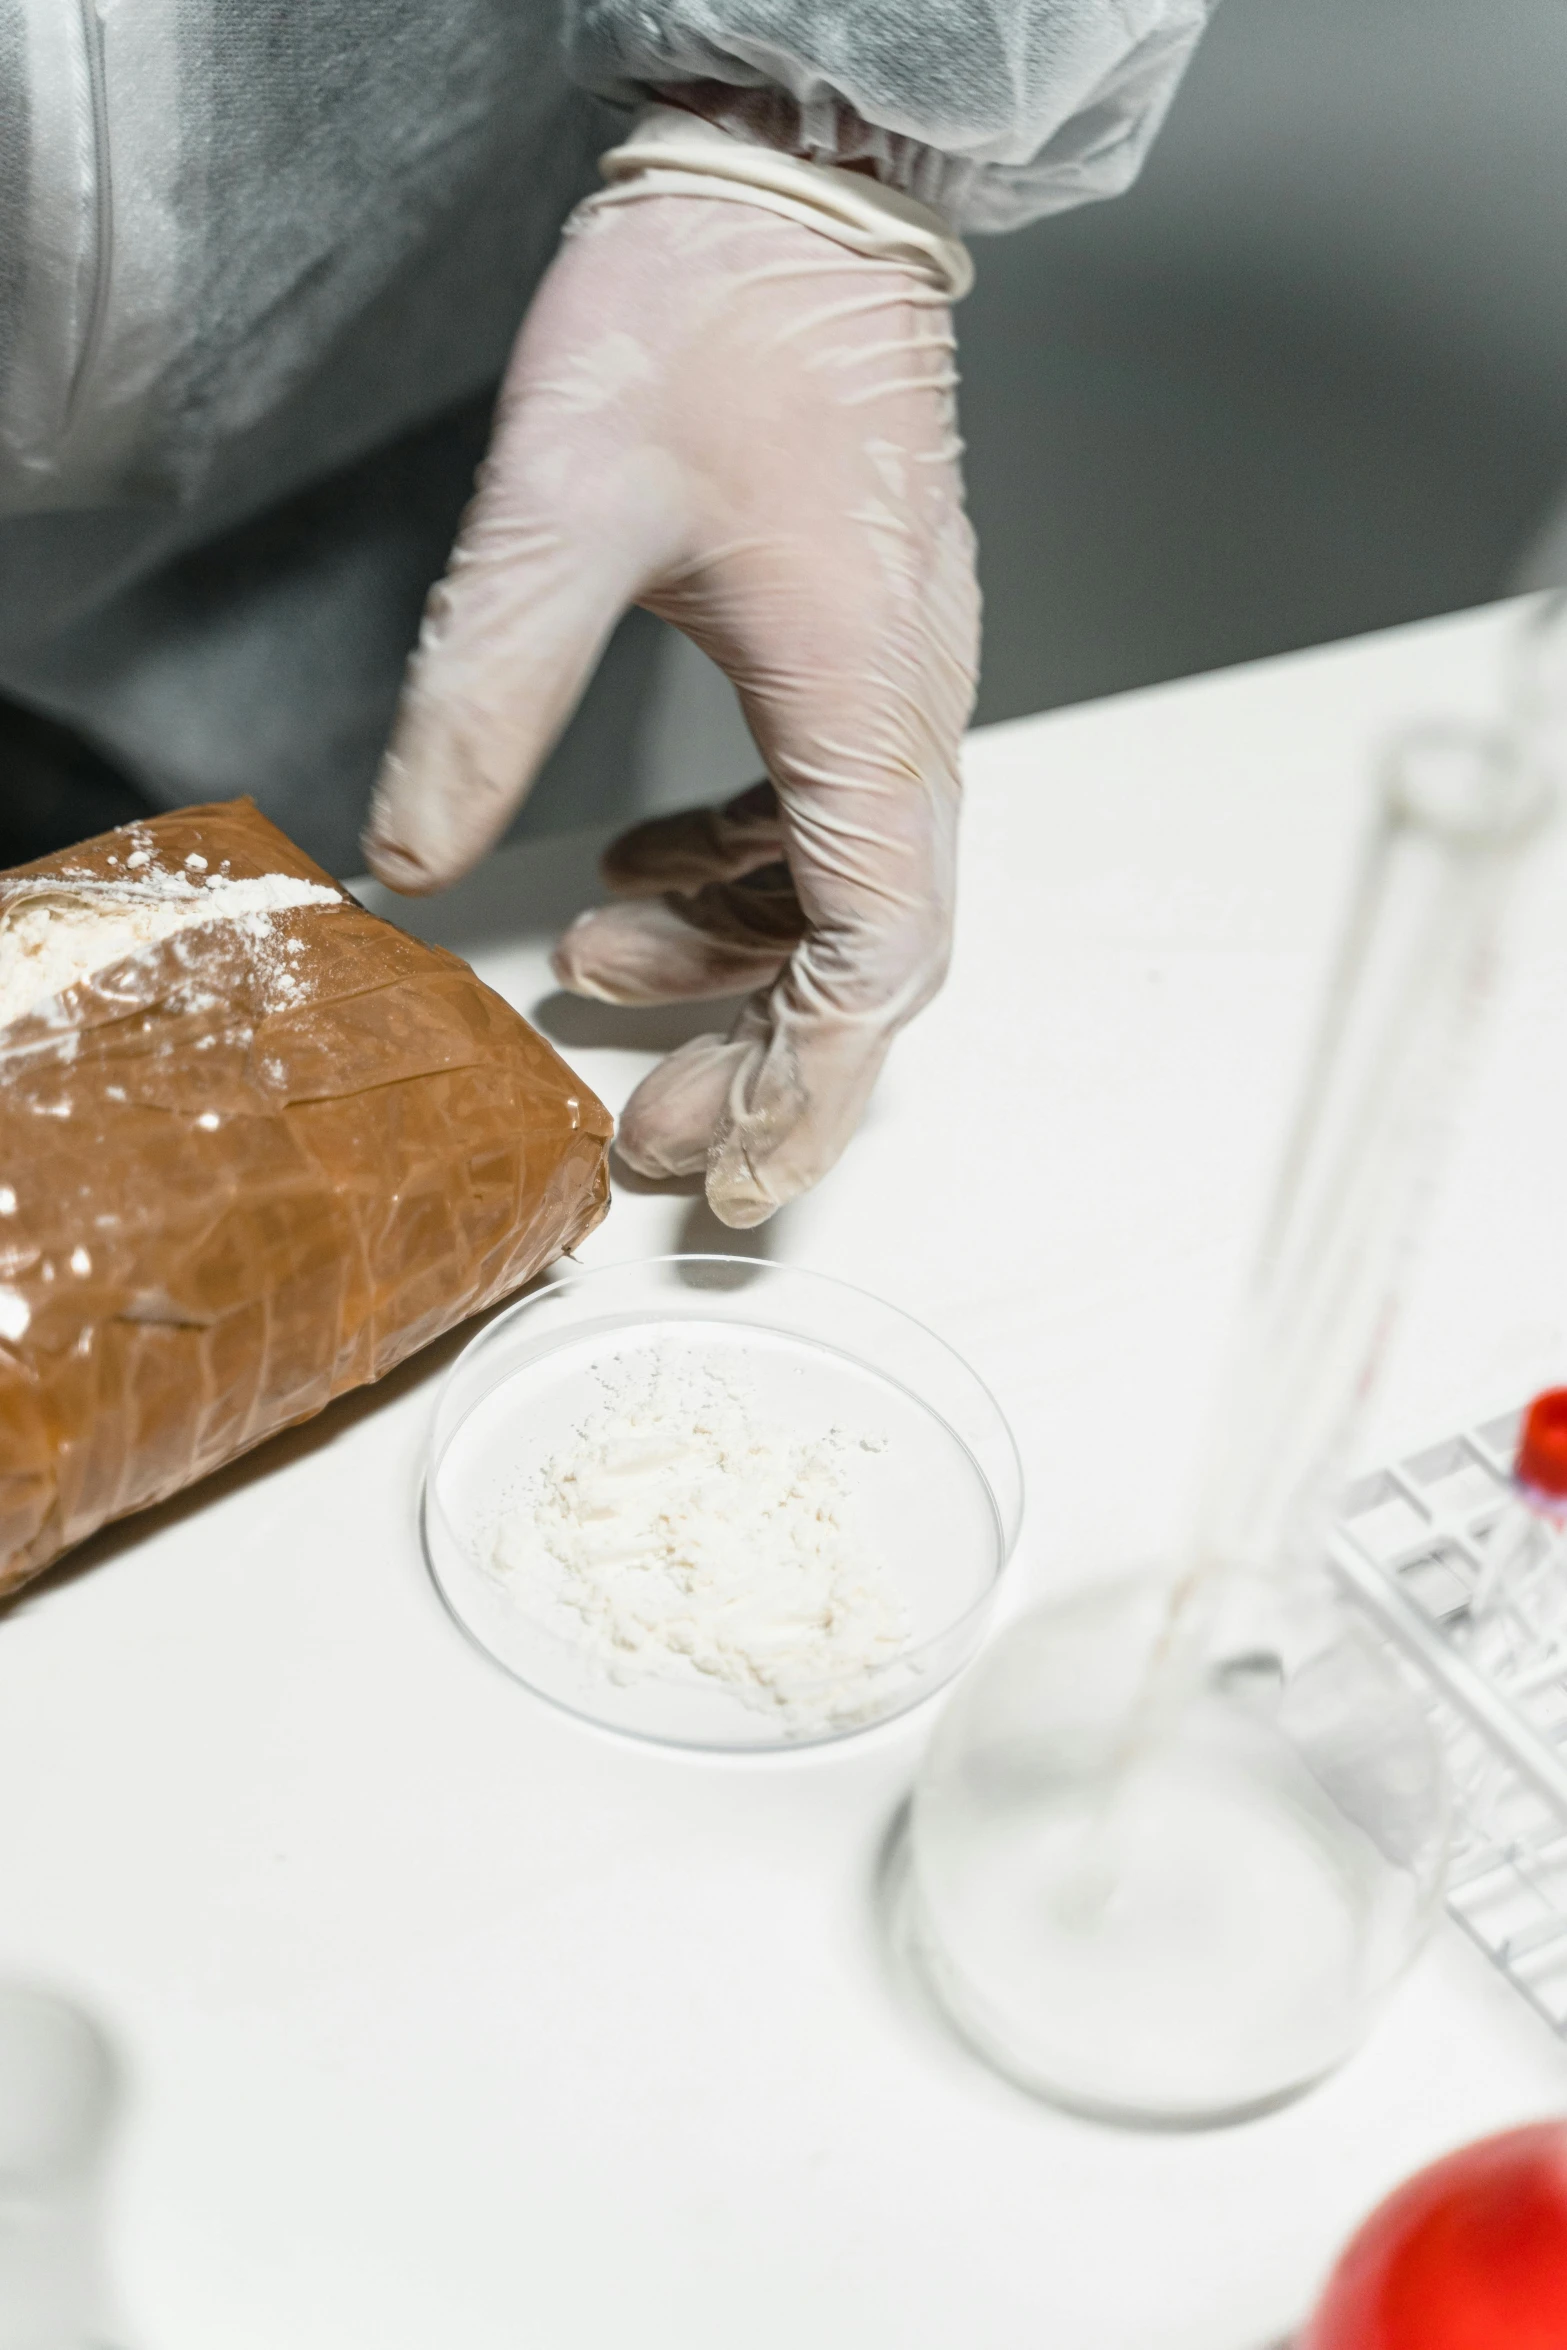 a close up of a person preparing food on a table, reagents, covered in white flour, scientific paper, holding meatloaf